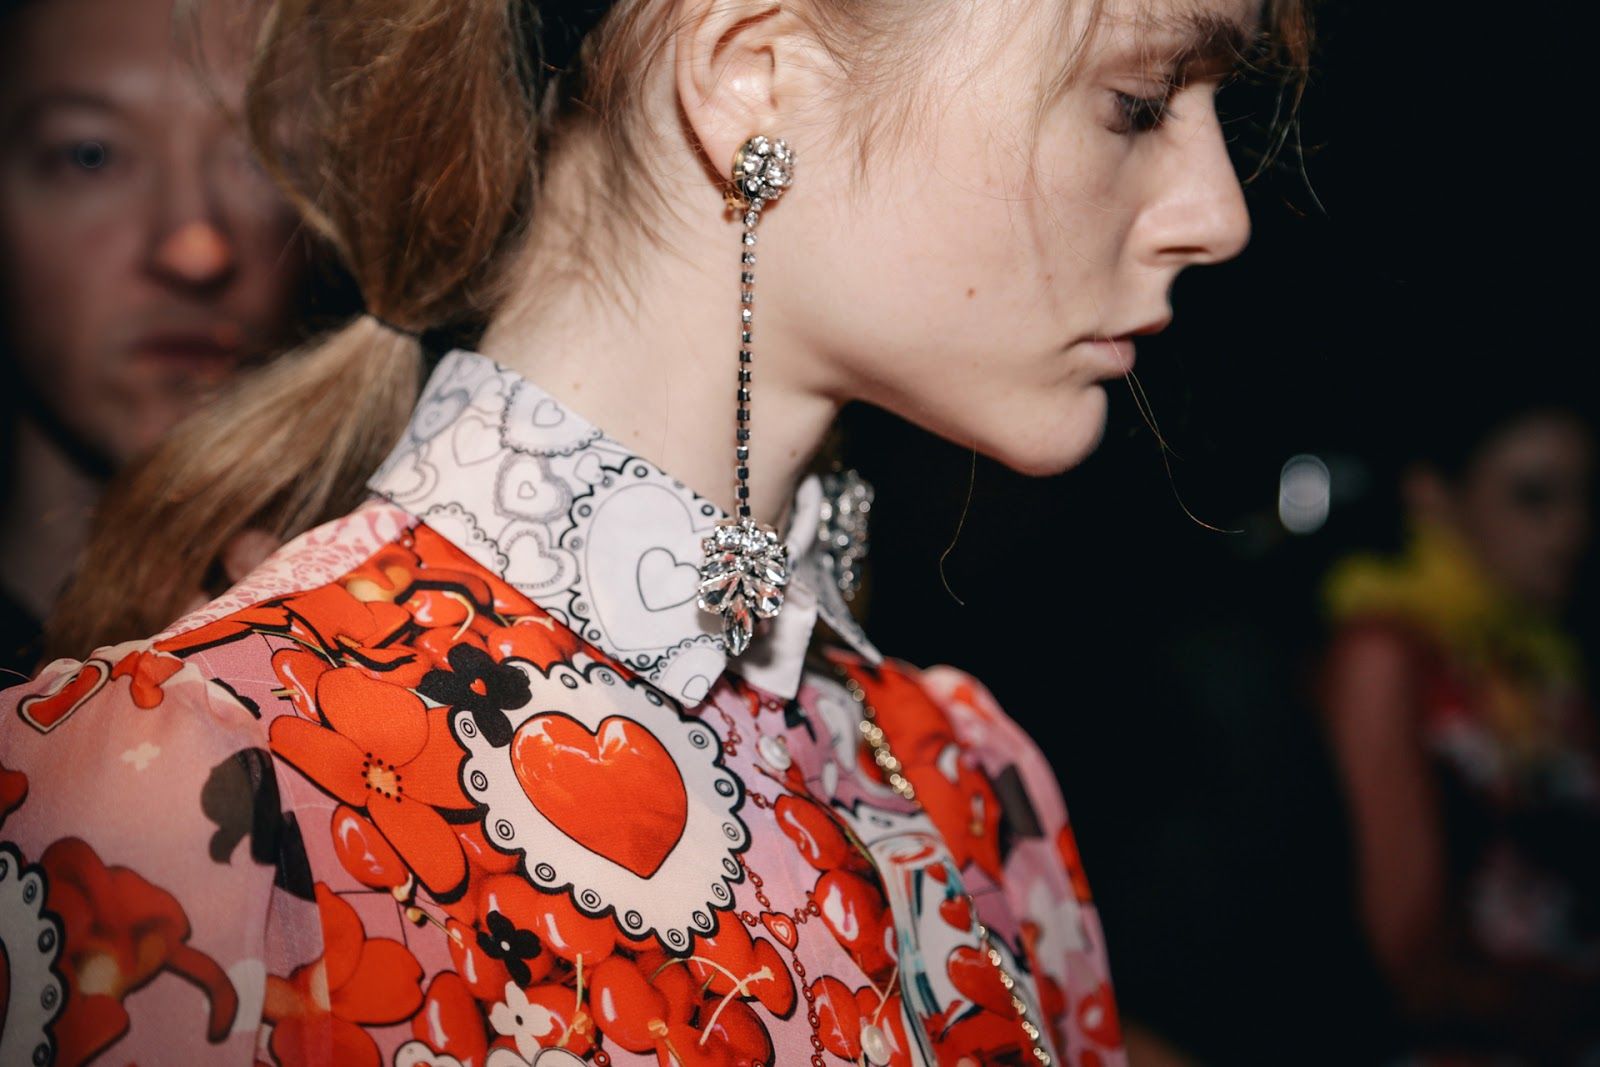 Get ready Bela!  Your appearance will be the center of attention with this earring trend